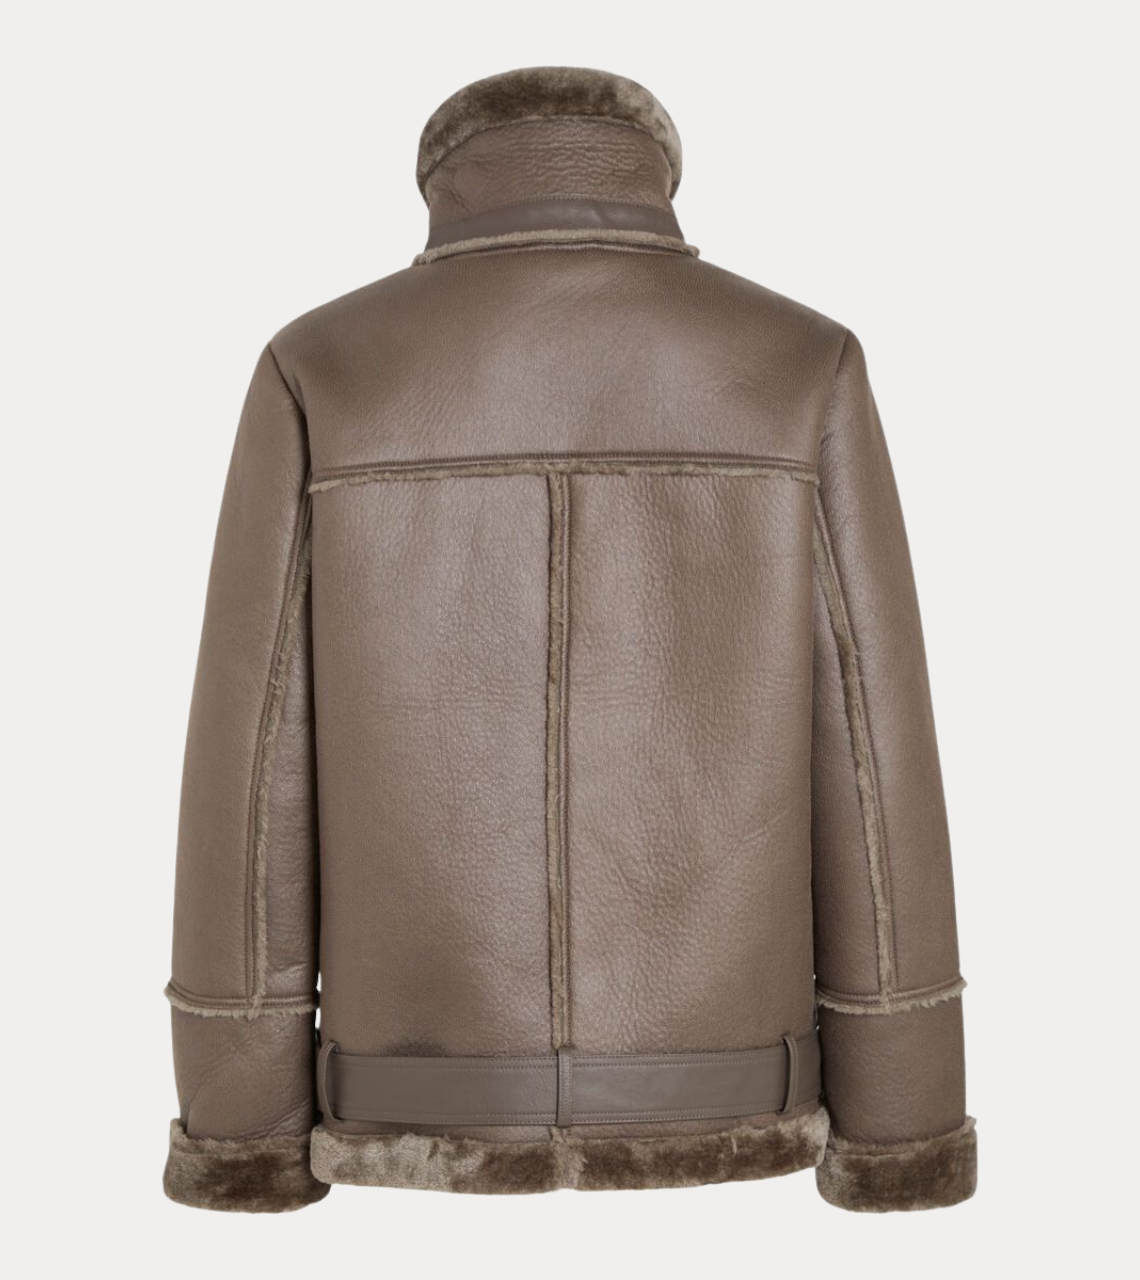  Brown Shearling Leather Jacket 